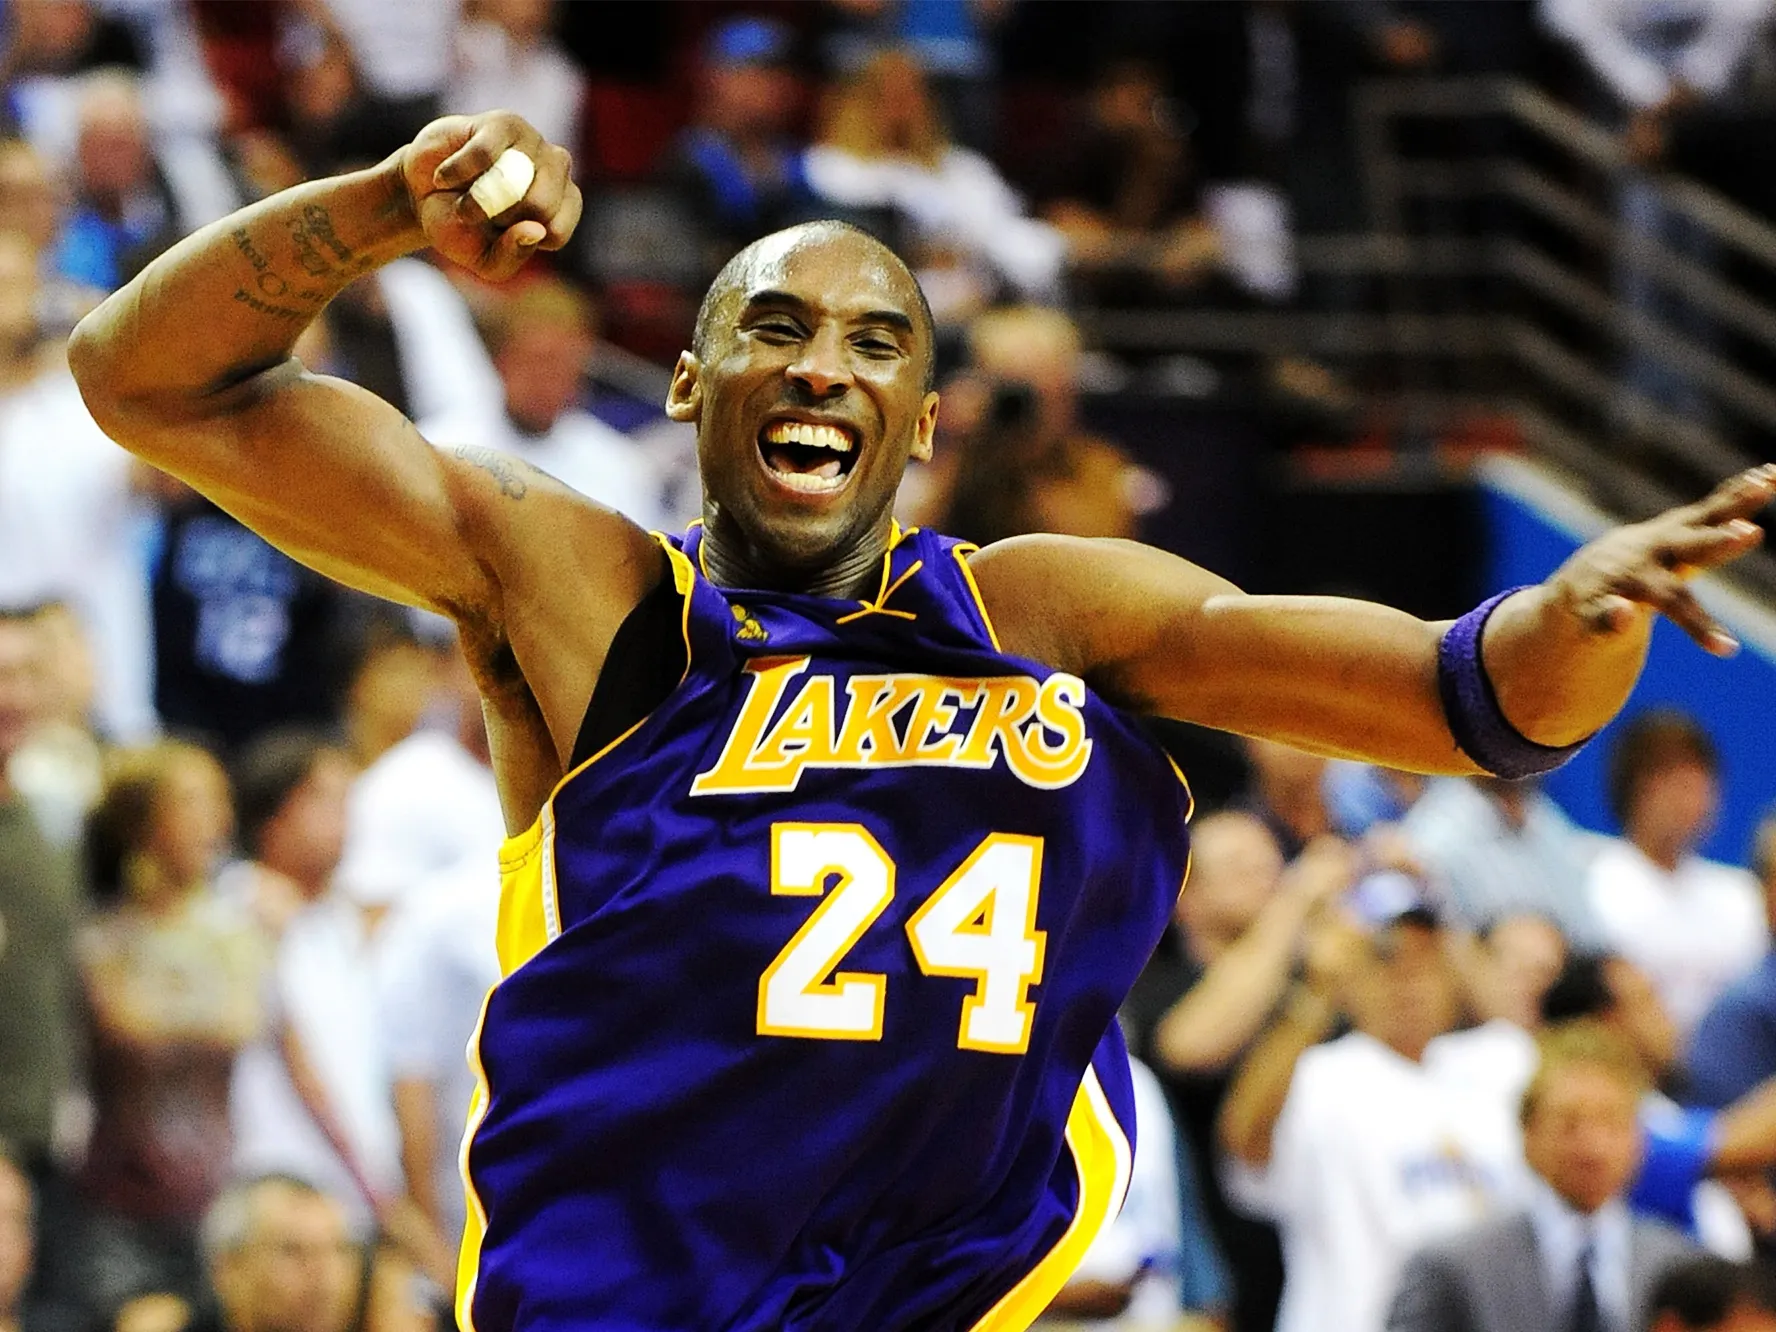 Kobe Bryant was known for his clutch performances. How many game-winning shots did he make in his career?